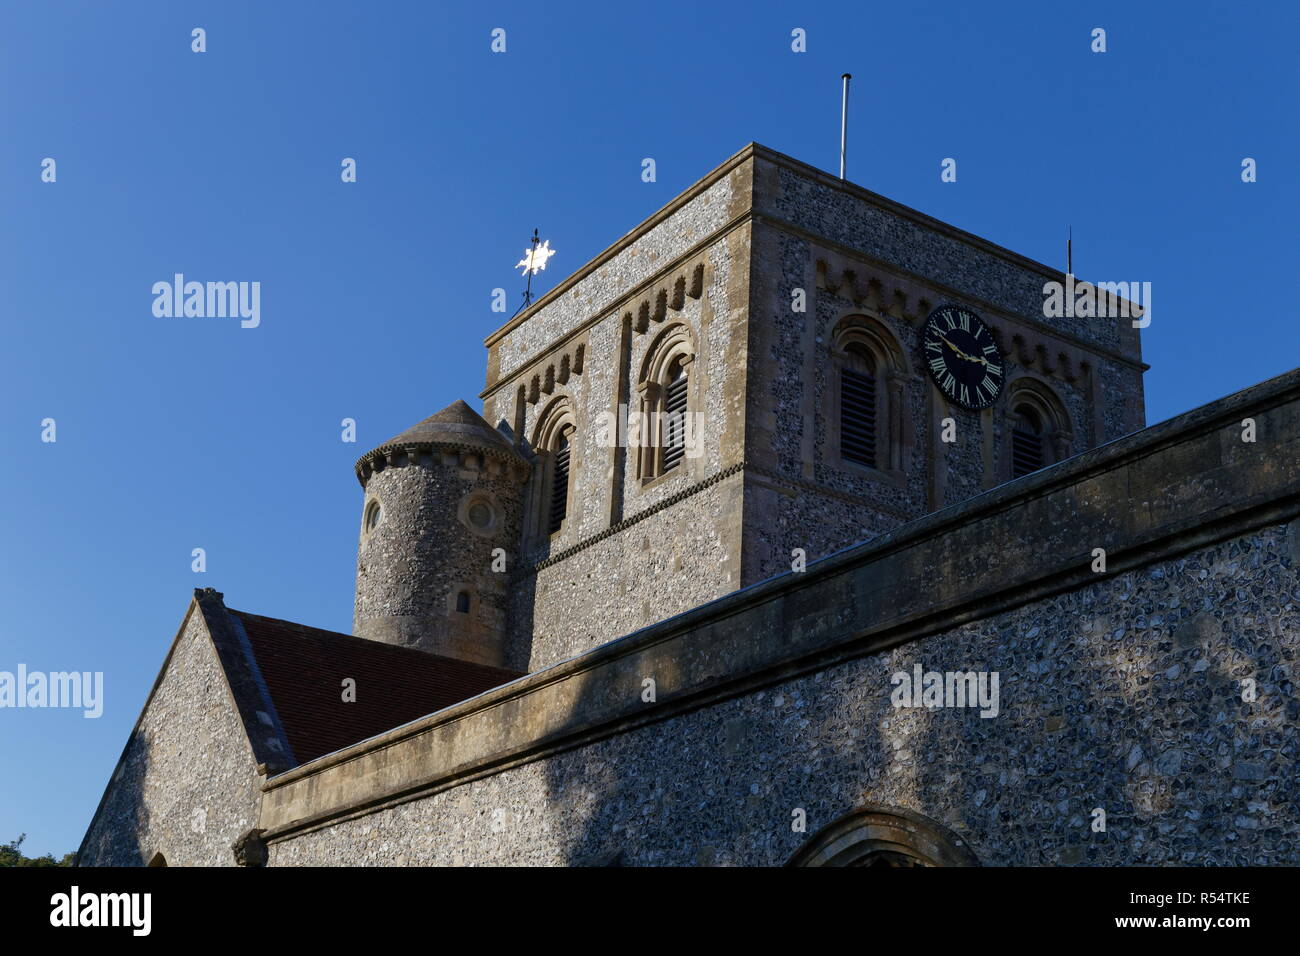 St Mary's church roof spire and clock Kingsclere Hampshire Stock Photo